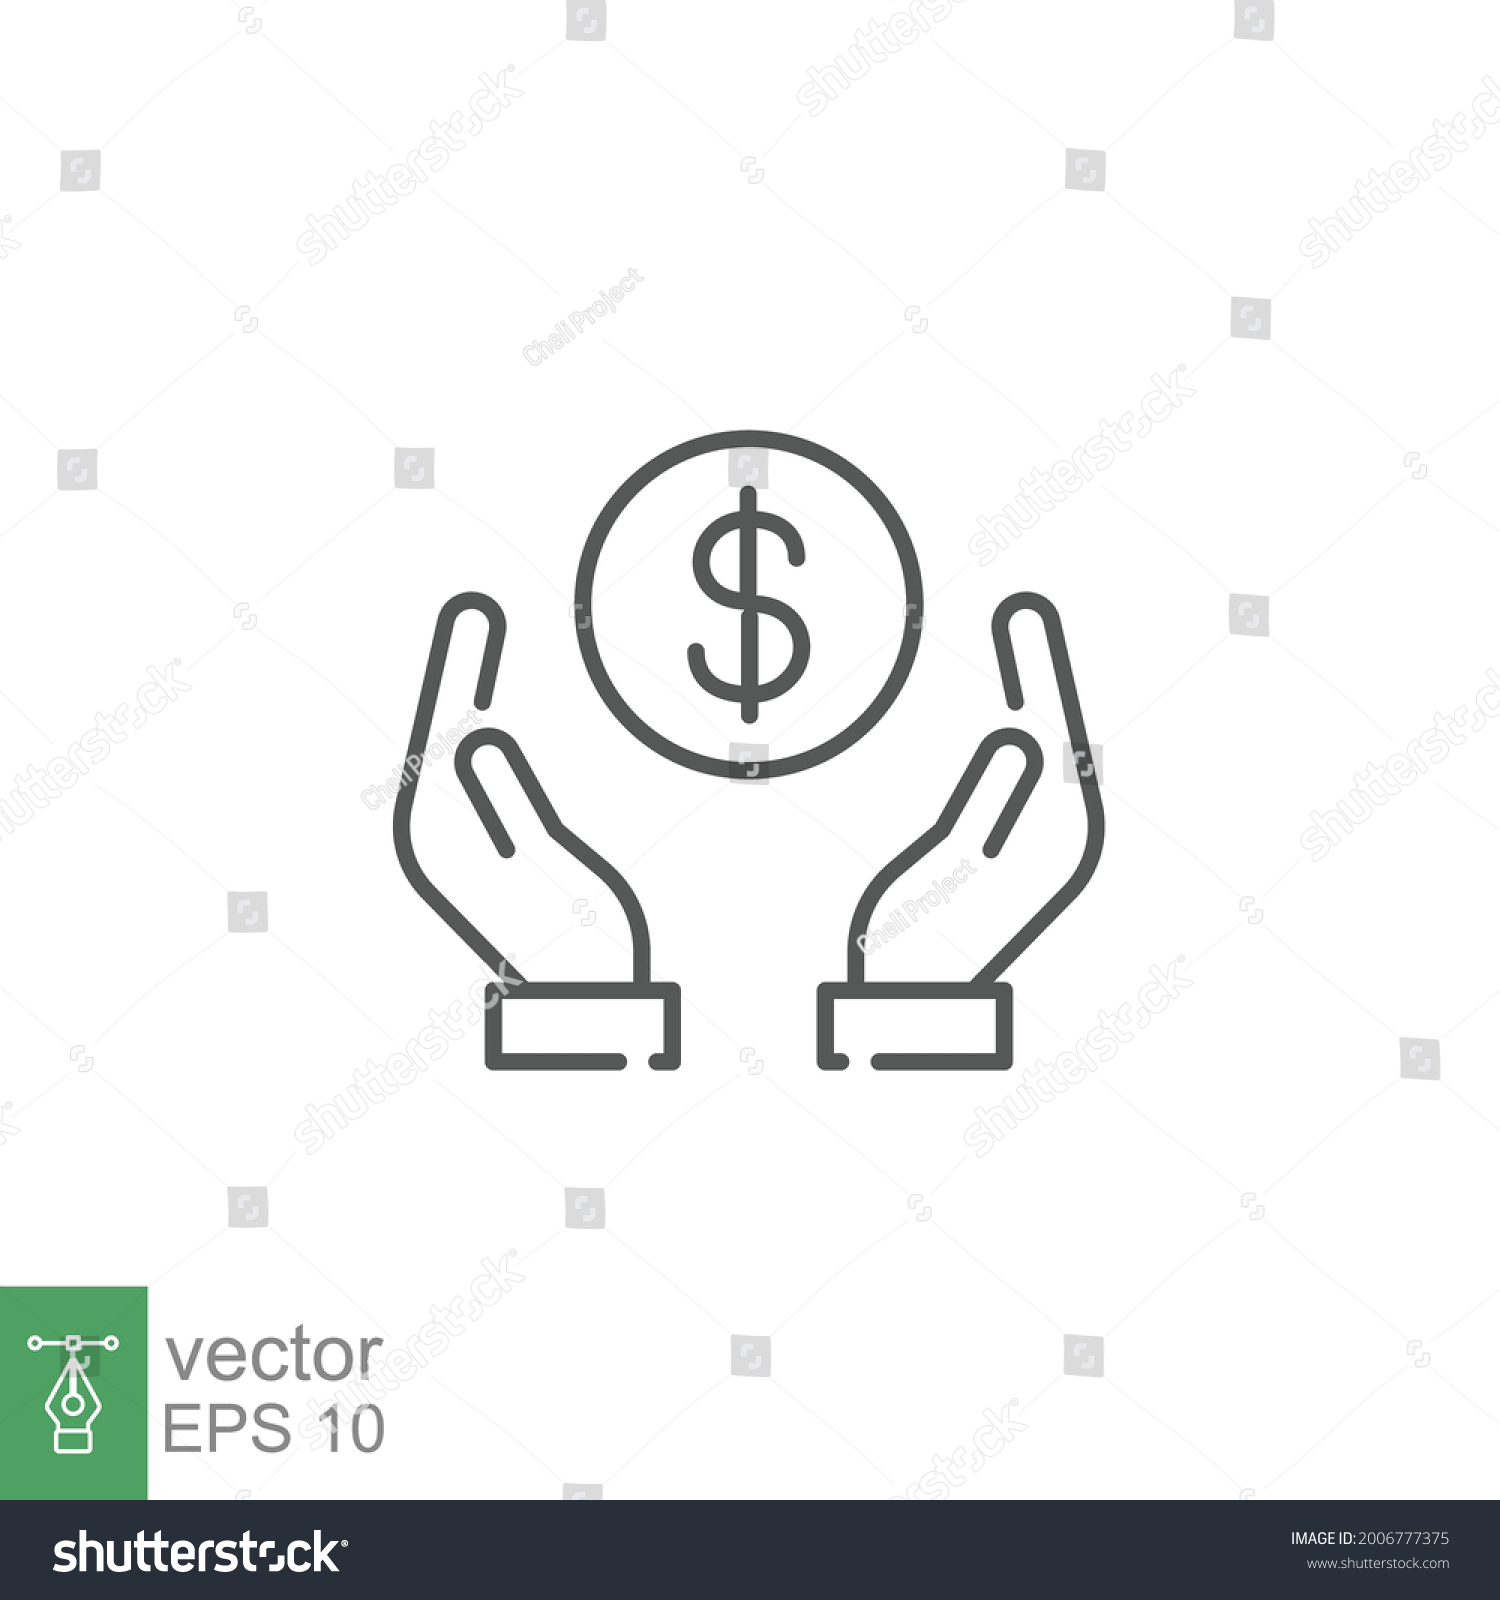 SVG of Save money icon, Salary investment and financial deposit, Wealthy, Simple Two hand with dollar coin symbol. Savings money silhouette stroke line Vector illustration Design on white background. EPS10 svg